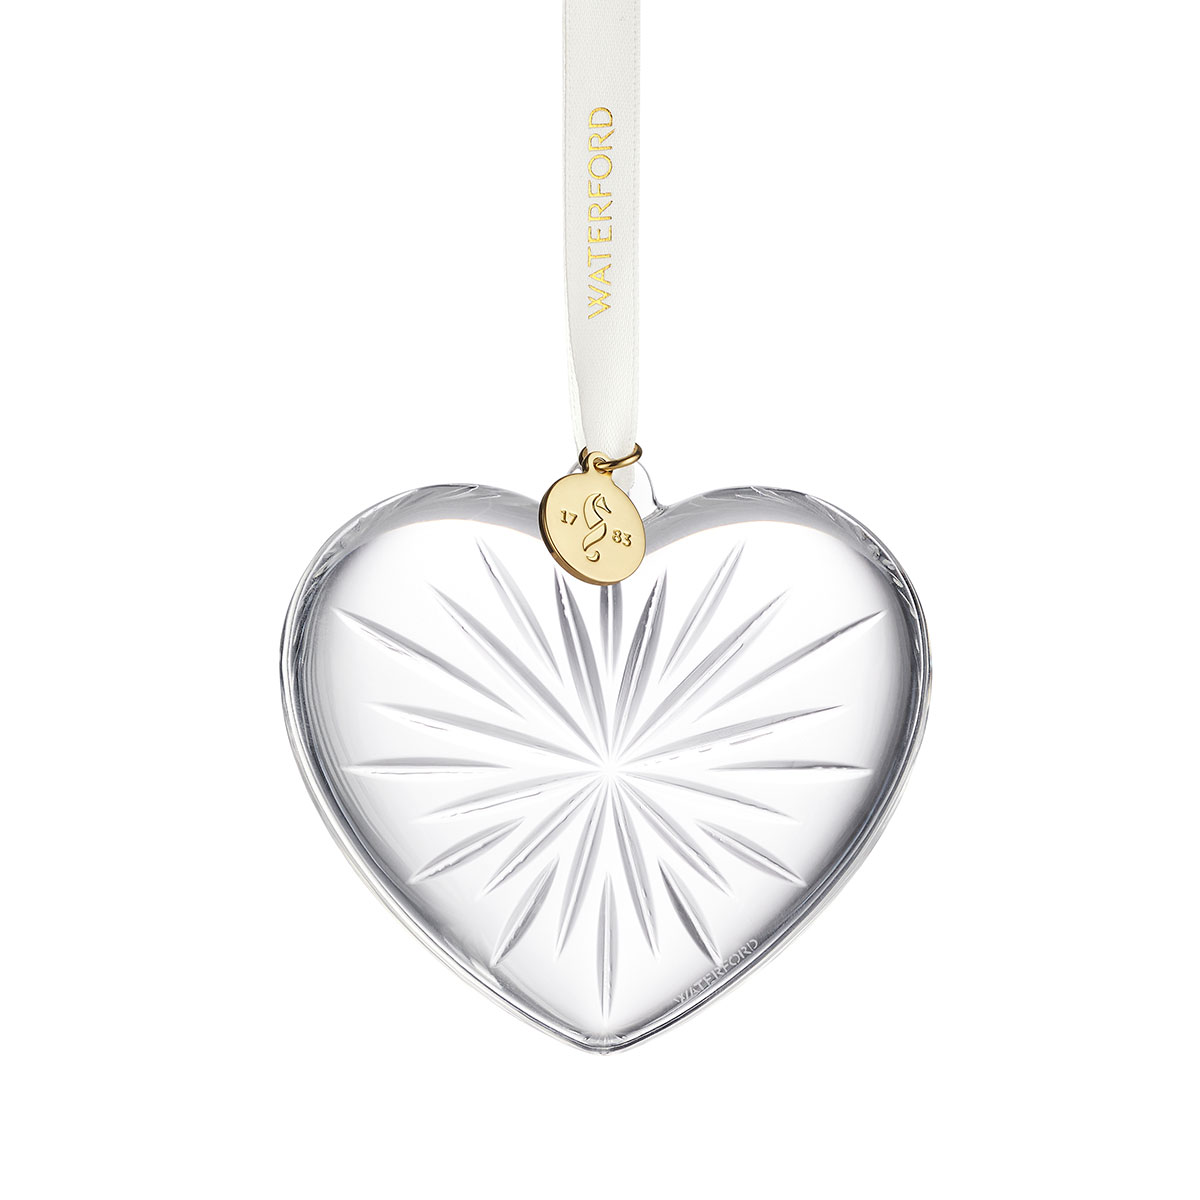 Waterford 2023 Heart Ornament